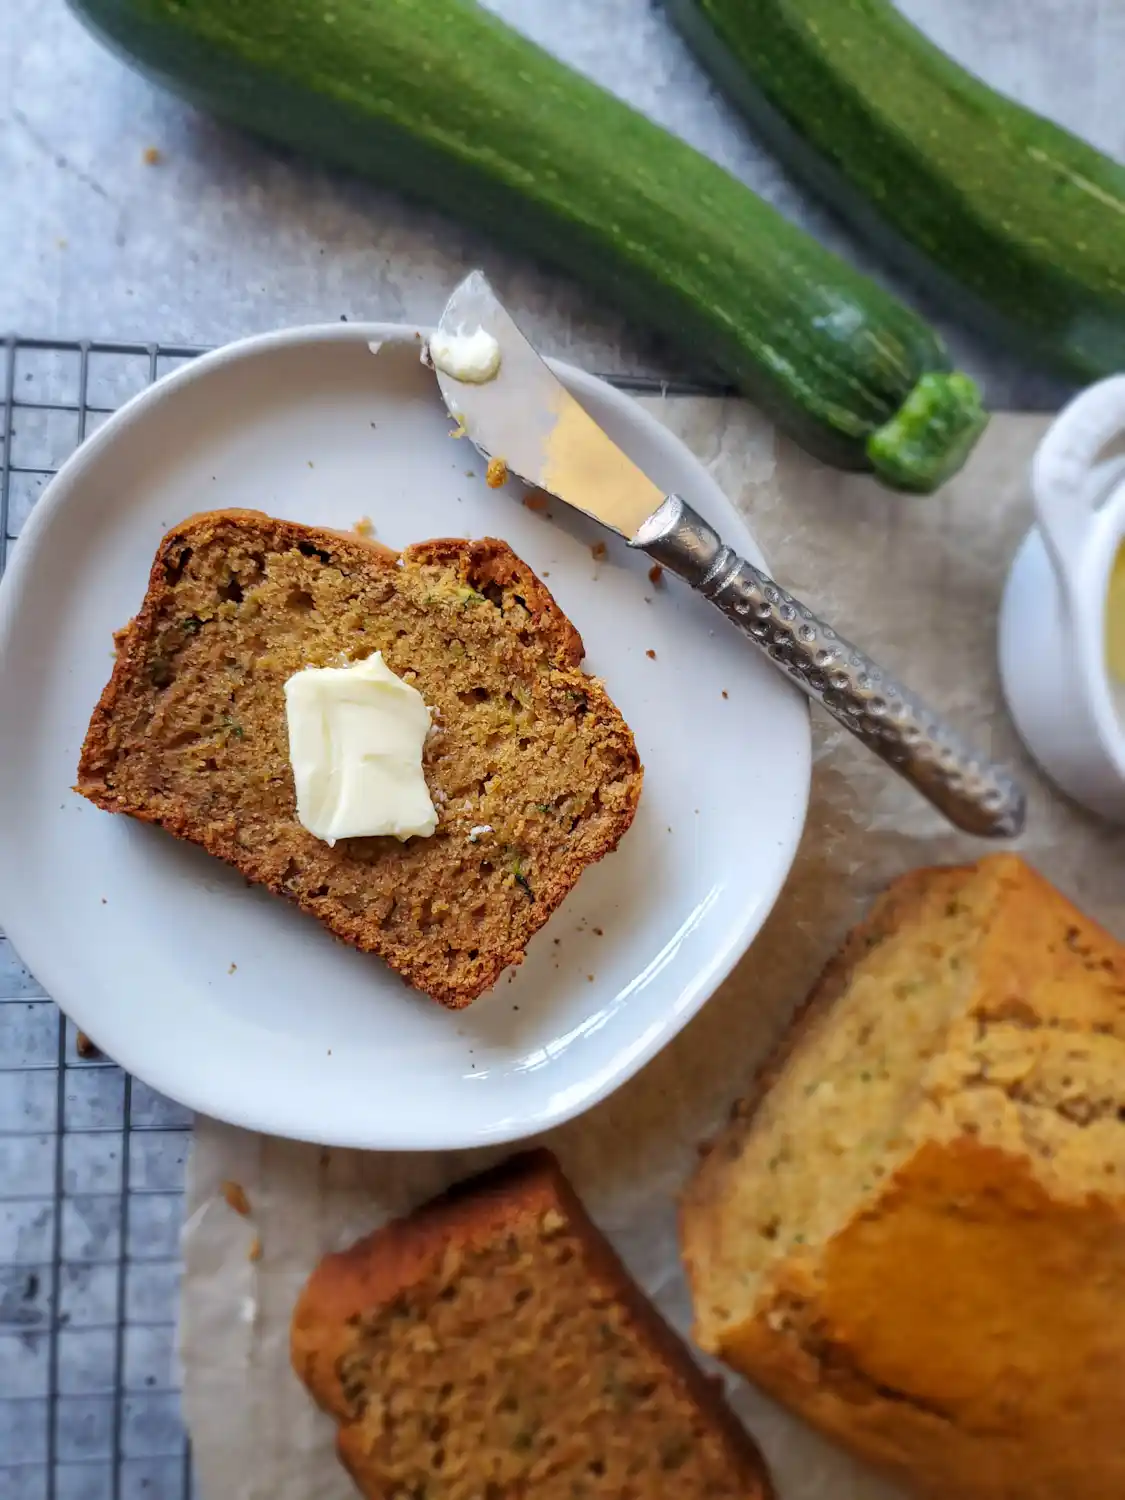 A slice of sourdough zucchini bread with a tab of butter sitting in the middle of the slice on a small ceramic plate,  a small butter knife is resting on the plate. Nearby is the rest of the loaf as well as some fresh summer squash. 